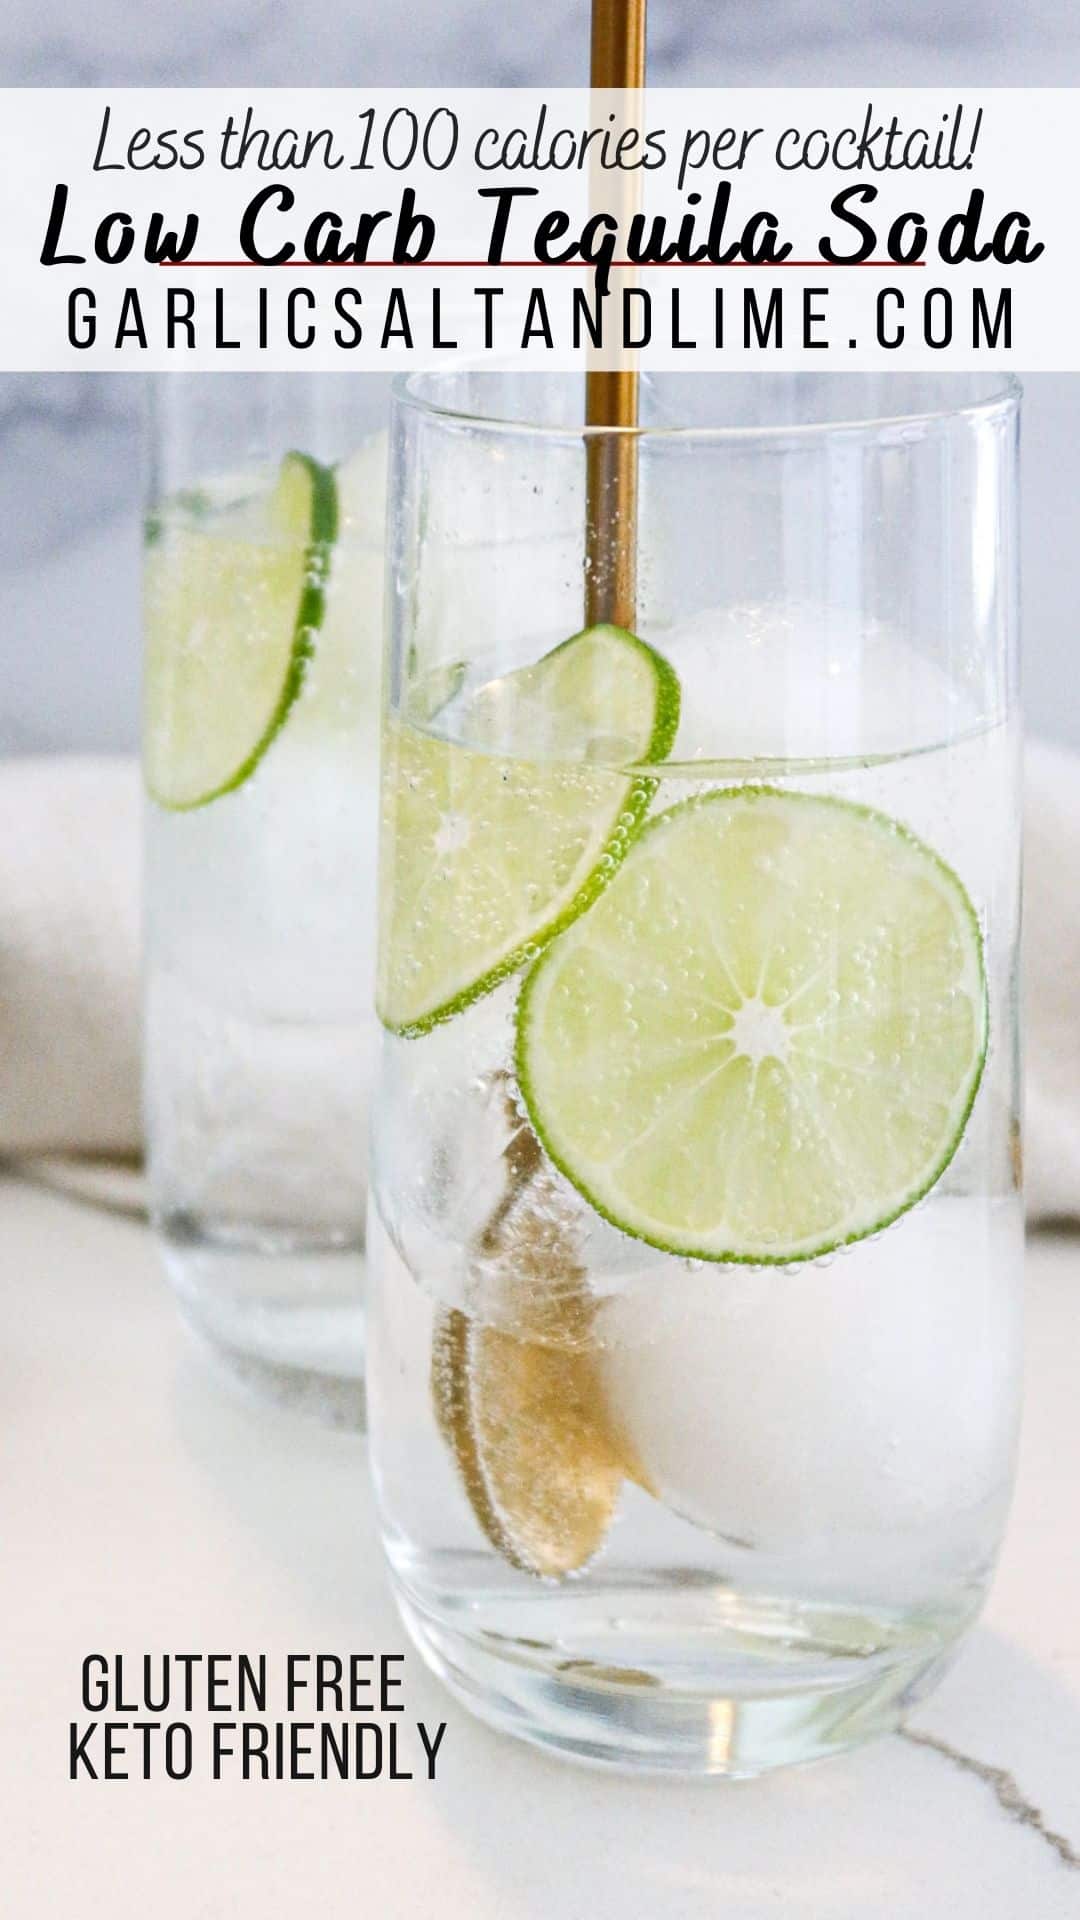 Tequila soda with text overlay for Pinterest.